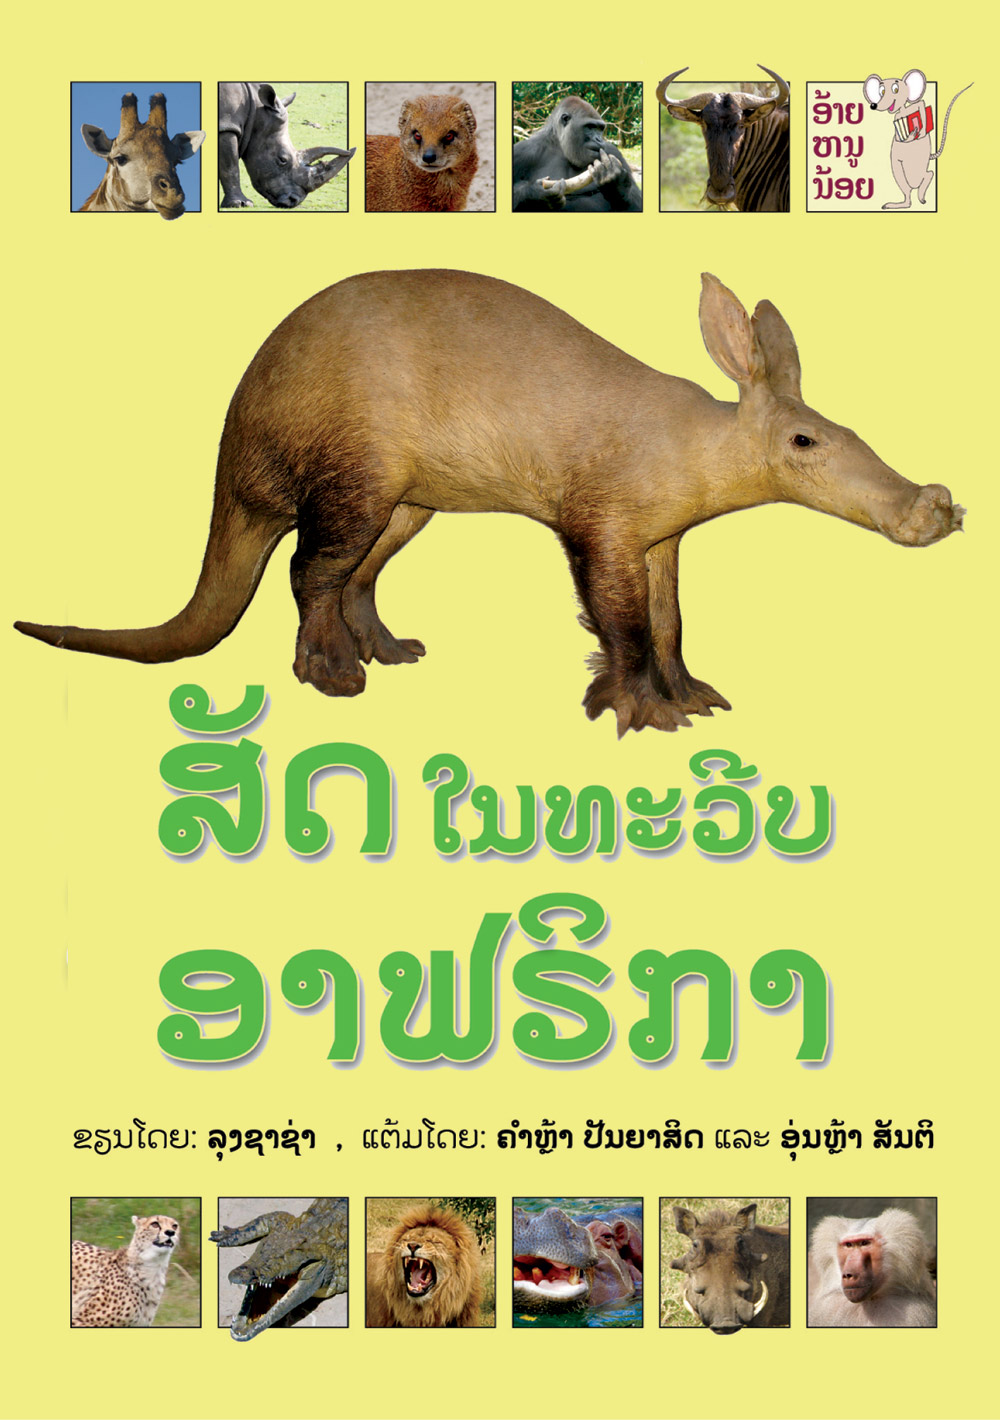 Animals of Africa large book cover, published in Lao language